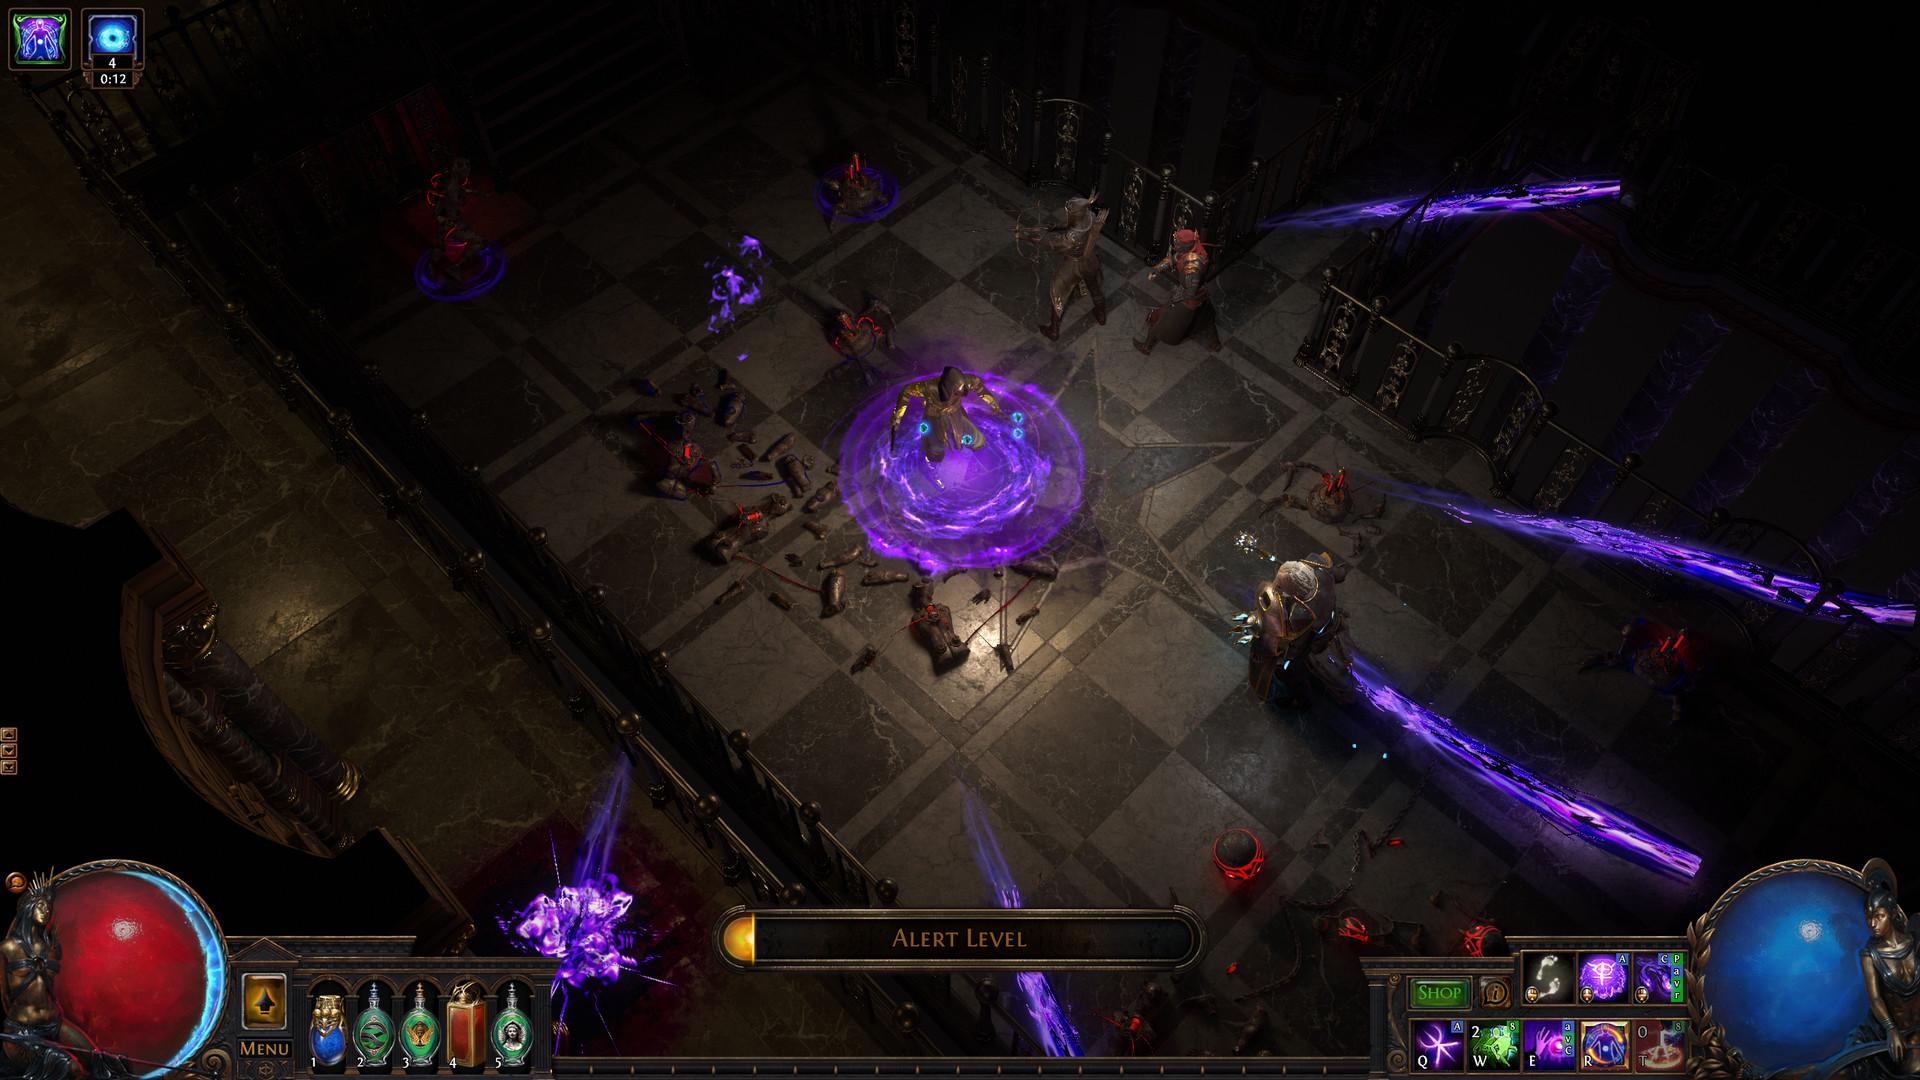 Screenshot №16 from game Path of Exile